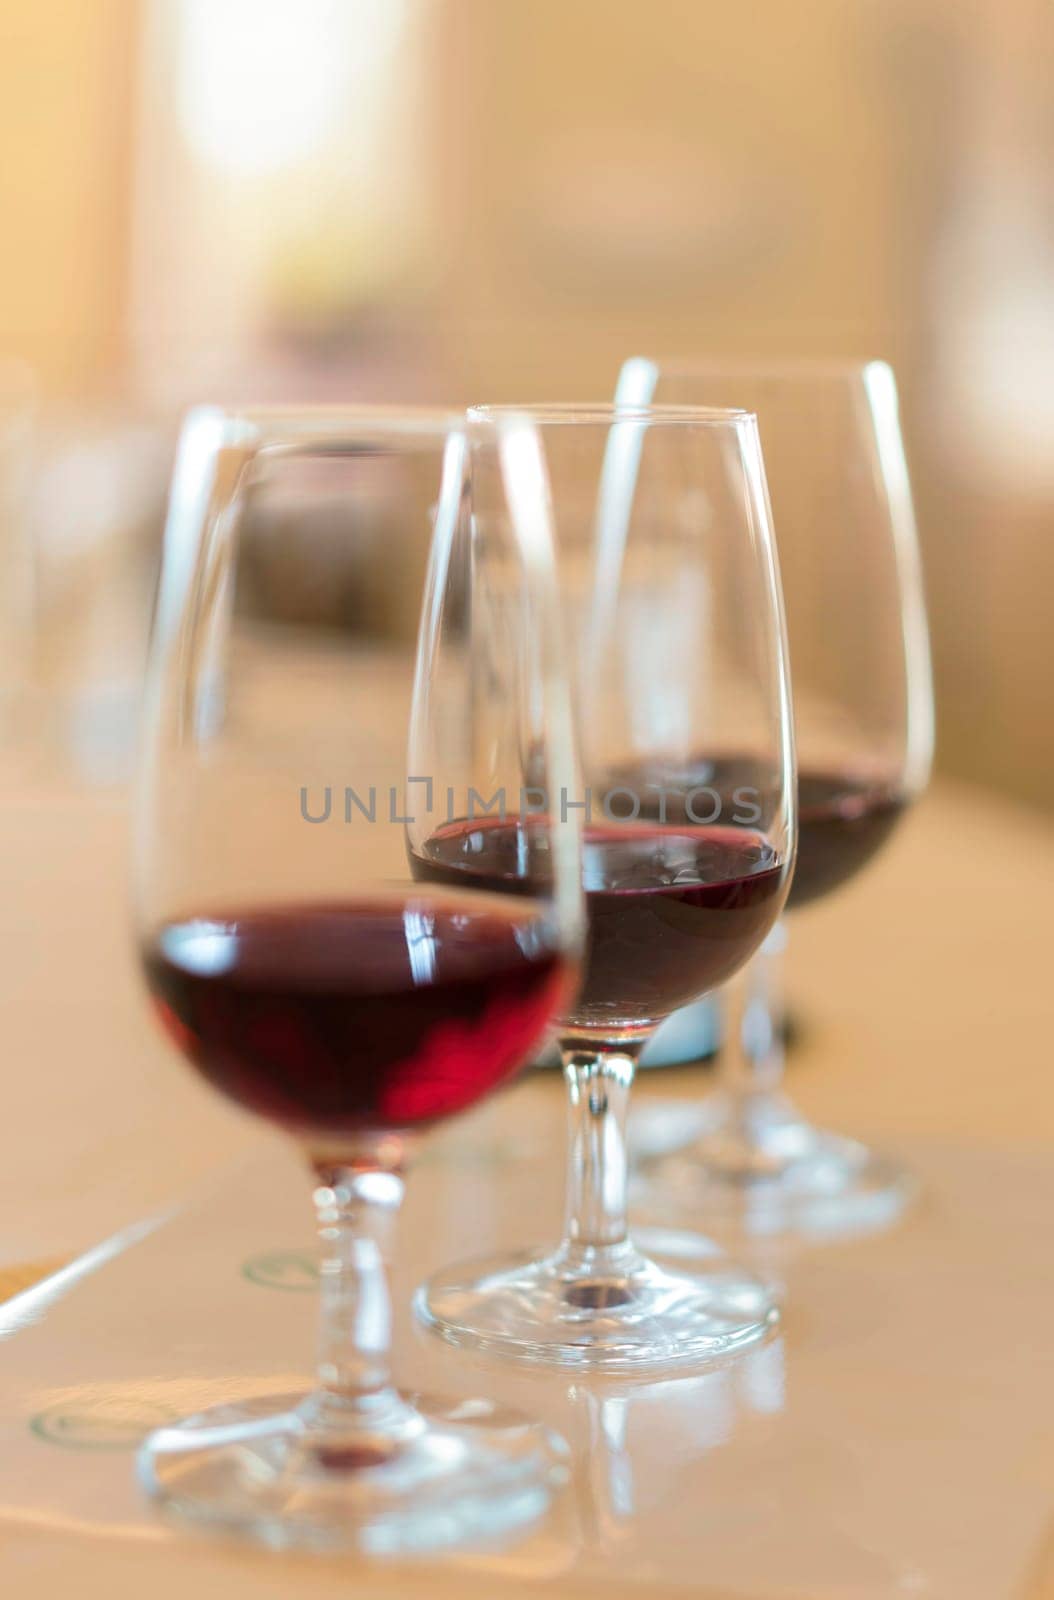 Oenology tasting glasses against a blurry background showcasing great red wine vintages. by kuremo